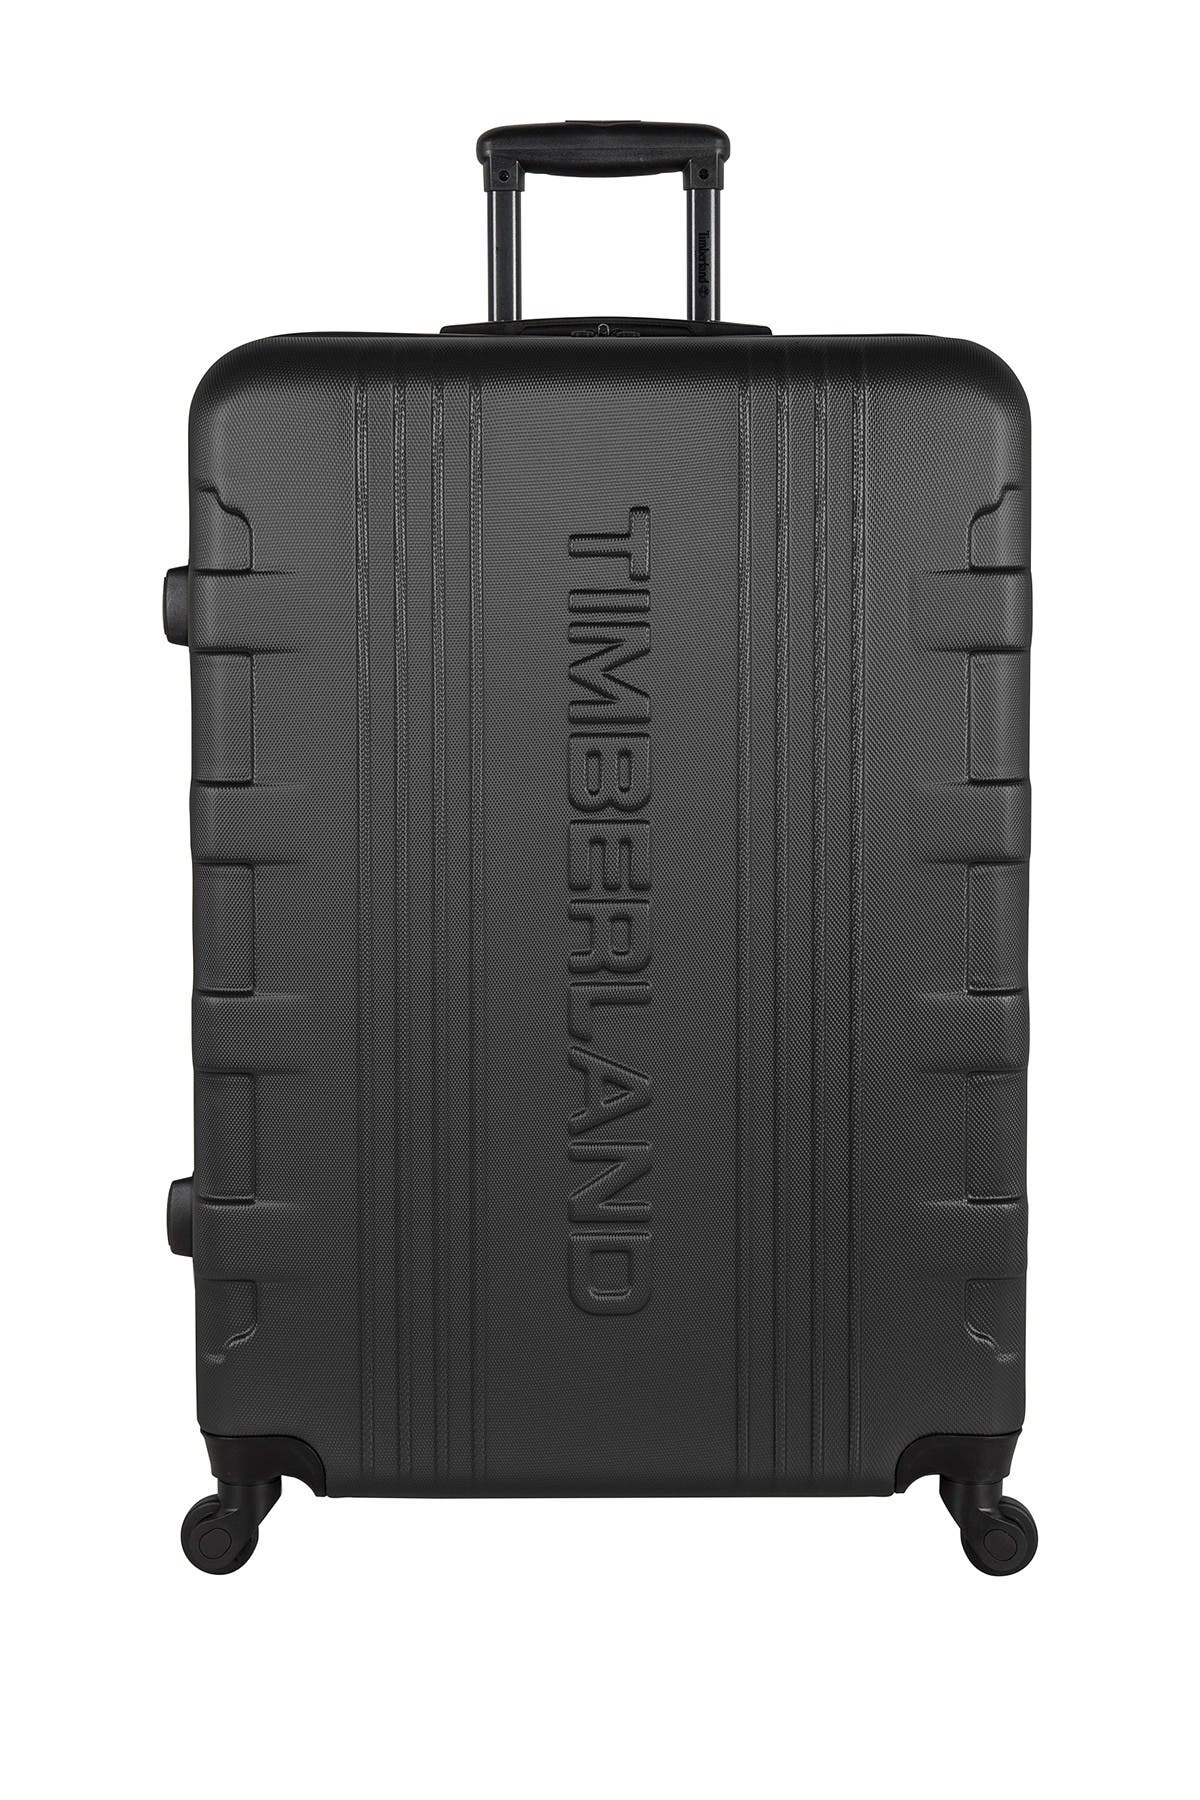 timberland luggage wheel replacement